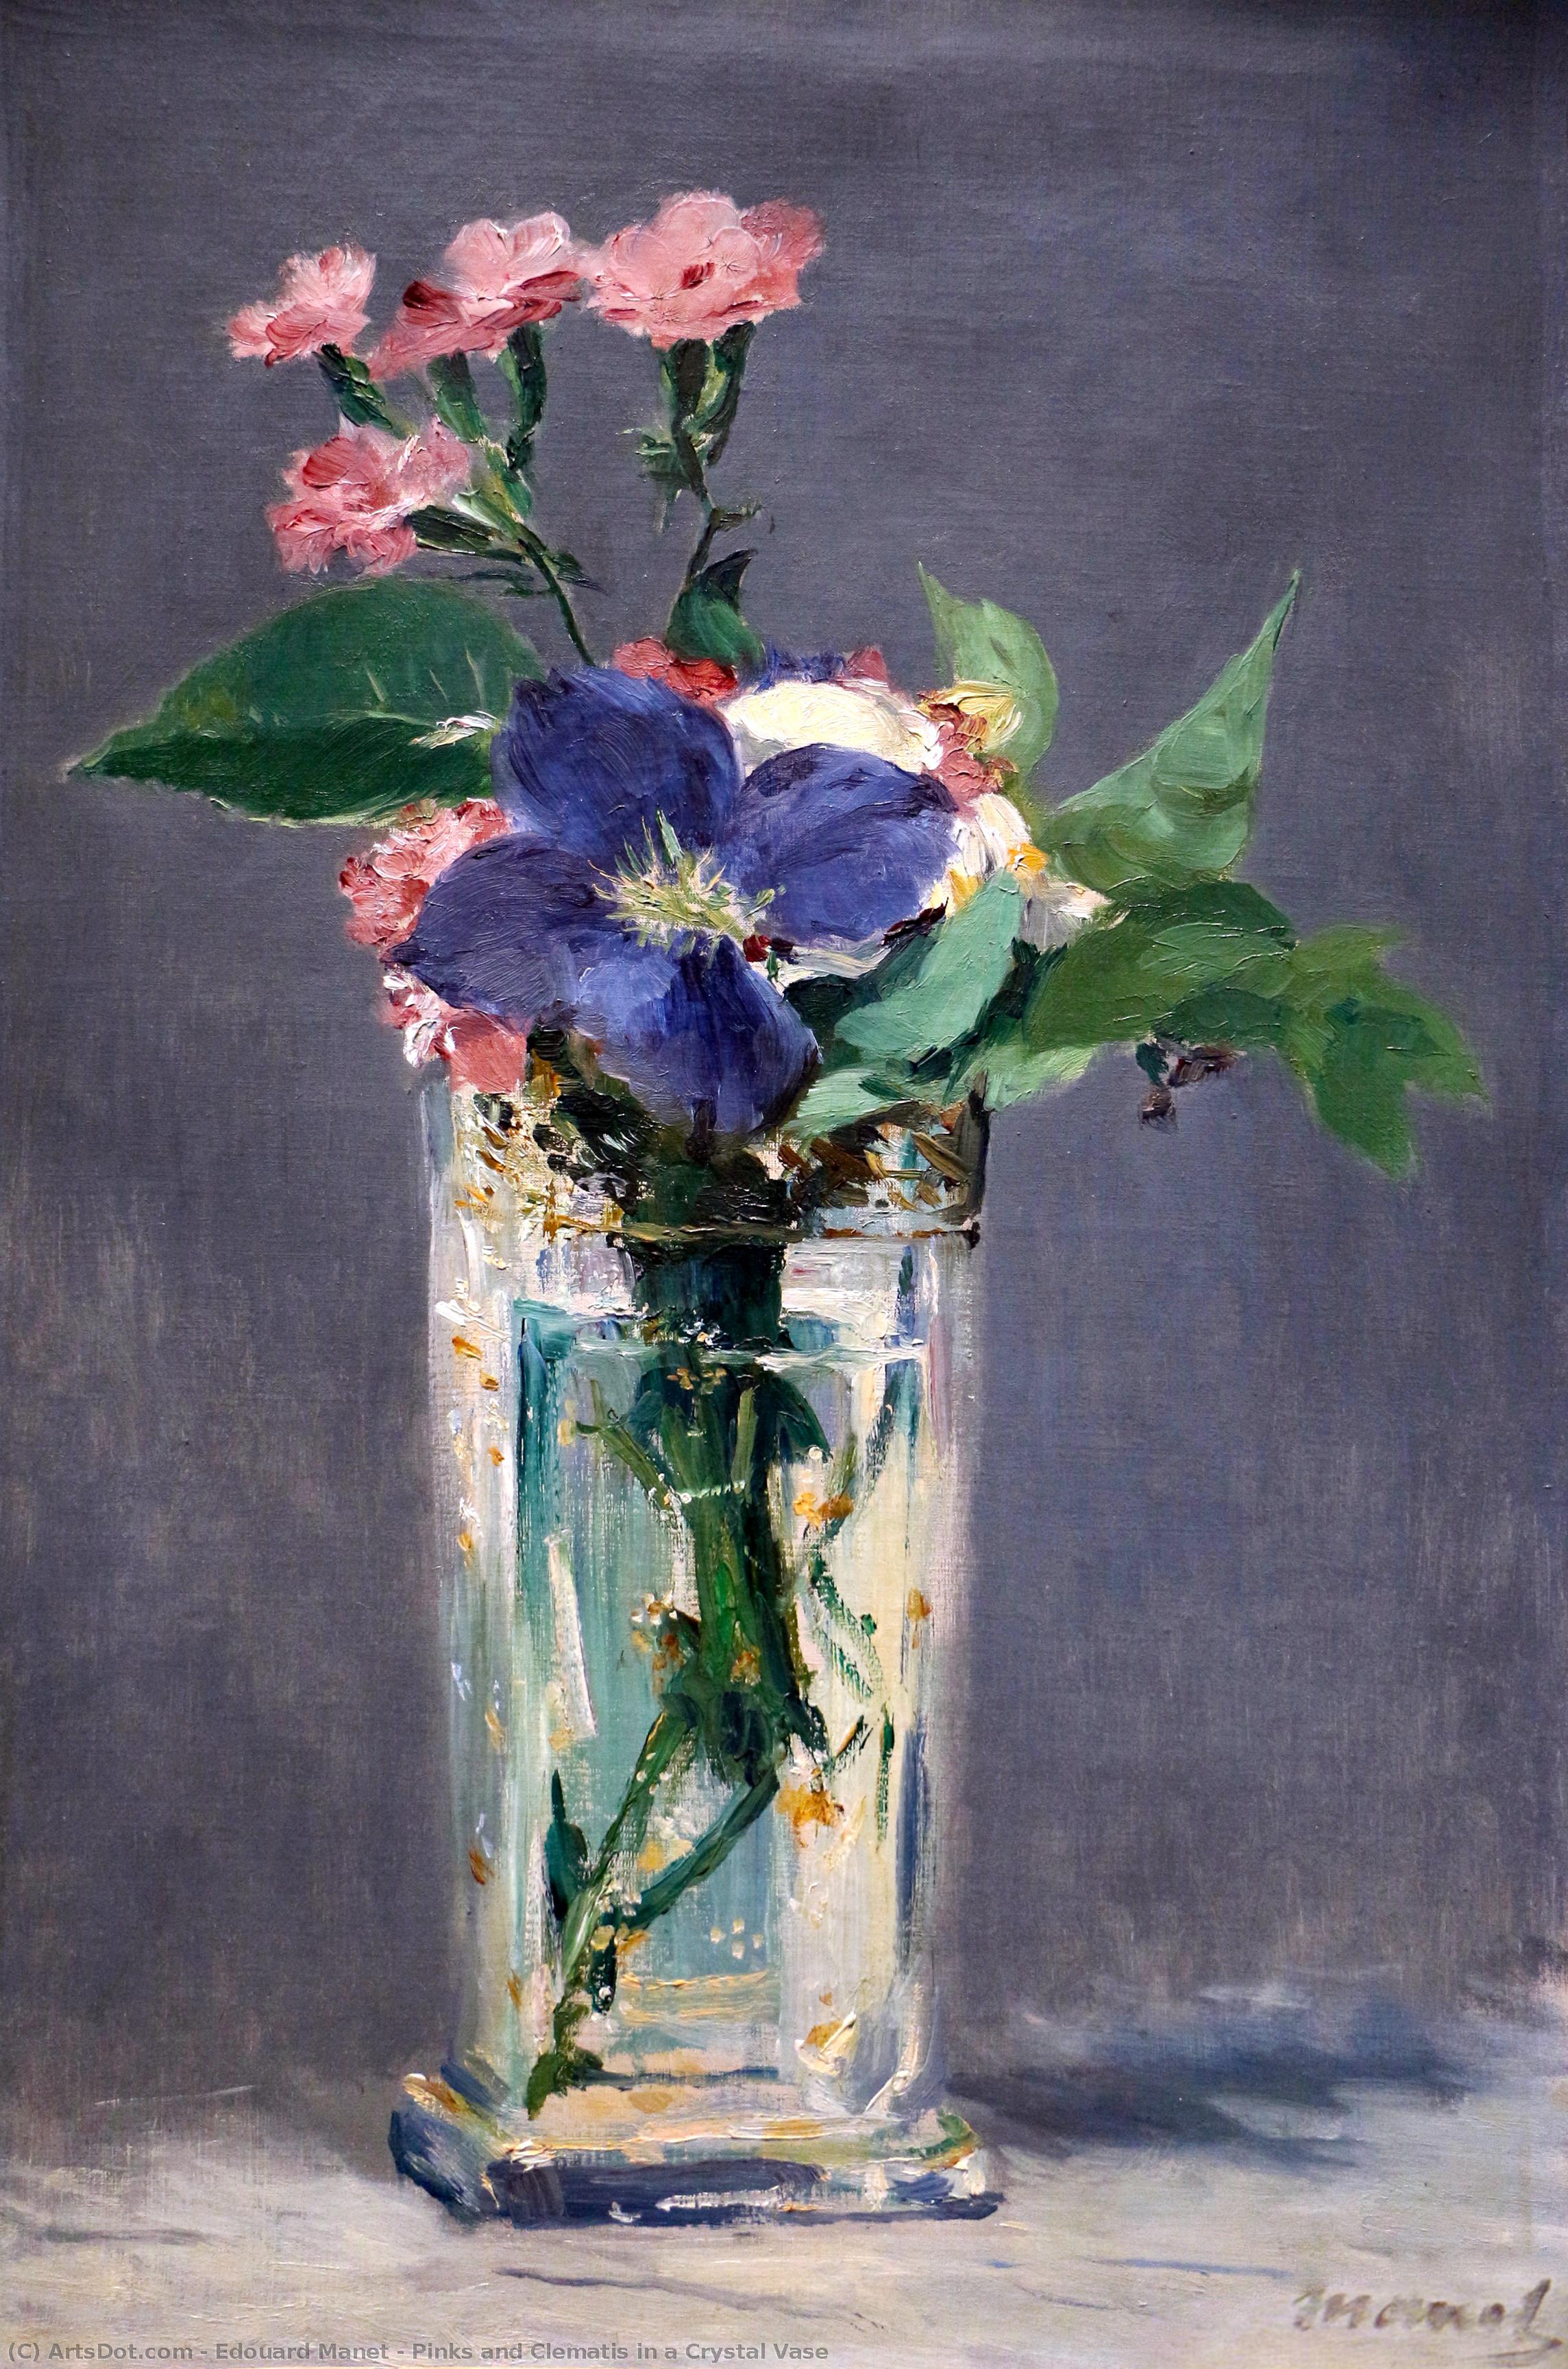 WikiOO.org - دایره المعارف هنرهای زیبا - نقاشی، آثار هنری Edouard Manet - Pinks and Clematis in a Crystal Vase